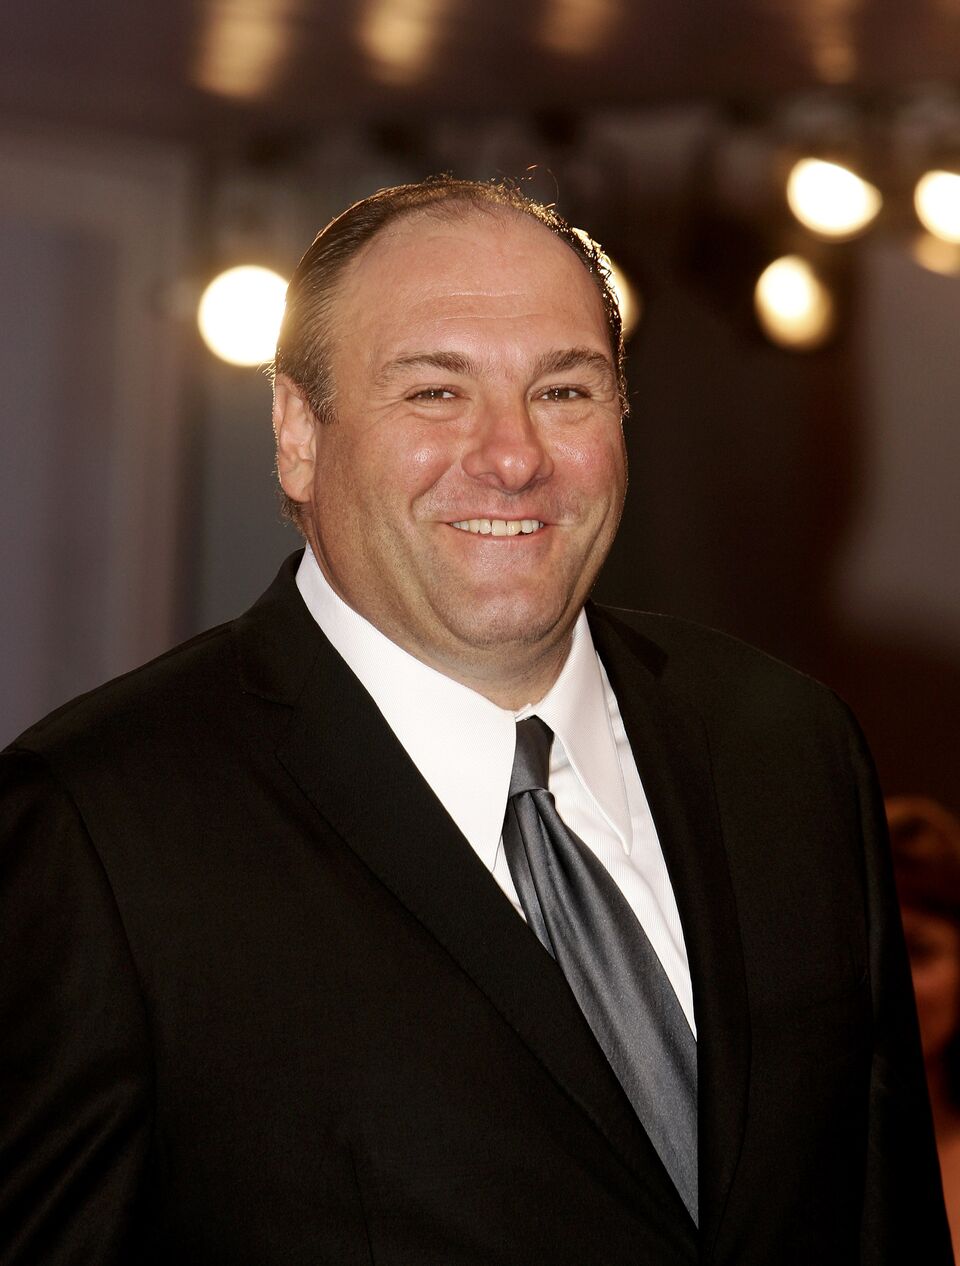 James Gandolfini attends the "Romance and Cigarettes" competition premiere. | Photo: Getty Images